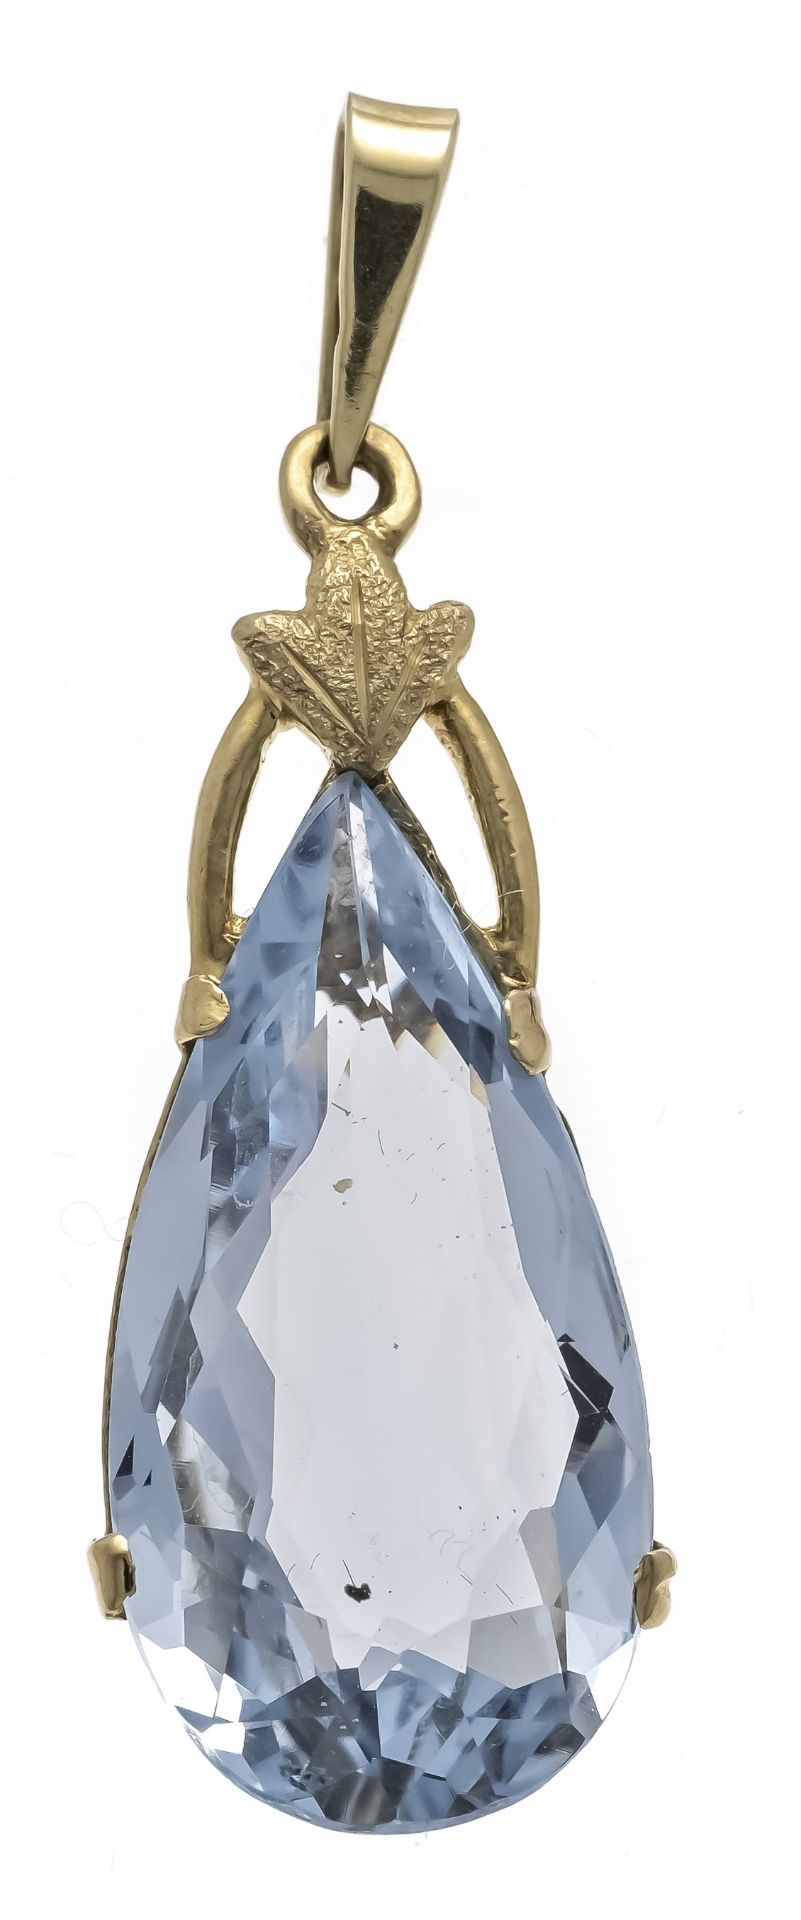 Gemstone pendant GG 333/000 with a drop-shaped faceted light blue gemstone 20.5 x 11 mm, l. 34 mm,